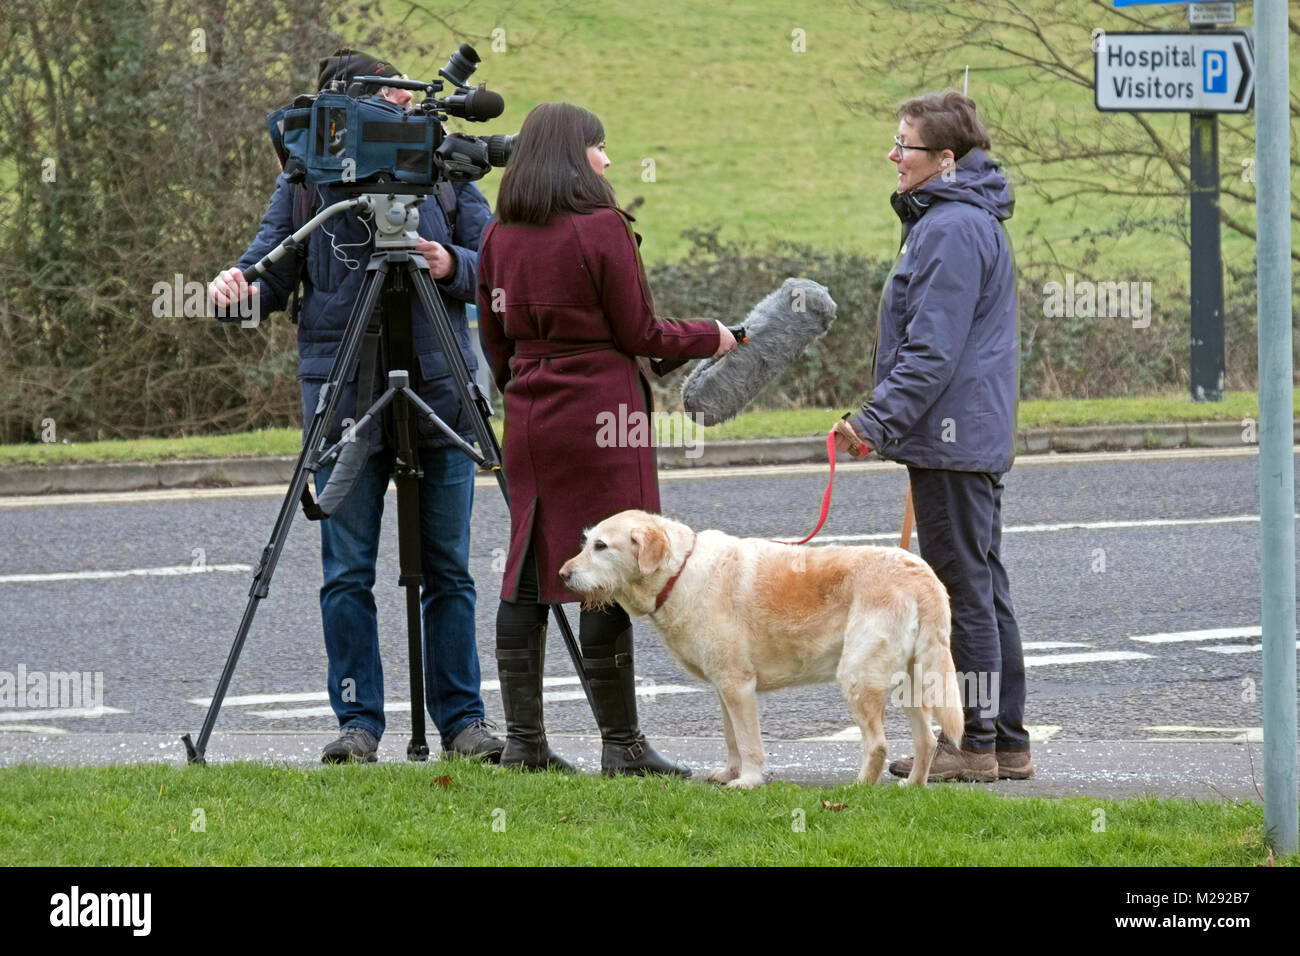 Weston-super-Mare, UK. 6th February, 2018. A reporter interviews a protestor at a demonstration against the overnight closure of the accident and emergency department at Weston General Hospital. Despite assurances that the closure is only a temporary measure, it has been in effect since July 2017, and a recent proposal for a merger between Weston Area Health NHS Trust and University Hospitals Bristol NHS Foundation Trust has created further uncertainty about Weston General Hospital’s future. Keith Ramsey/Alamy Live News Stock Photo